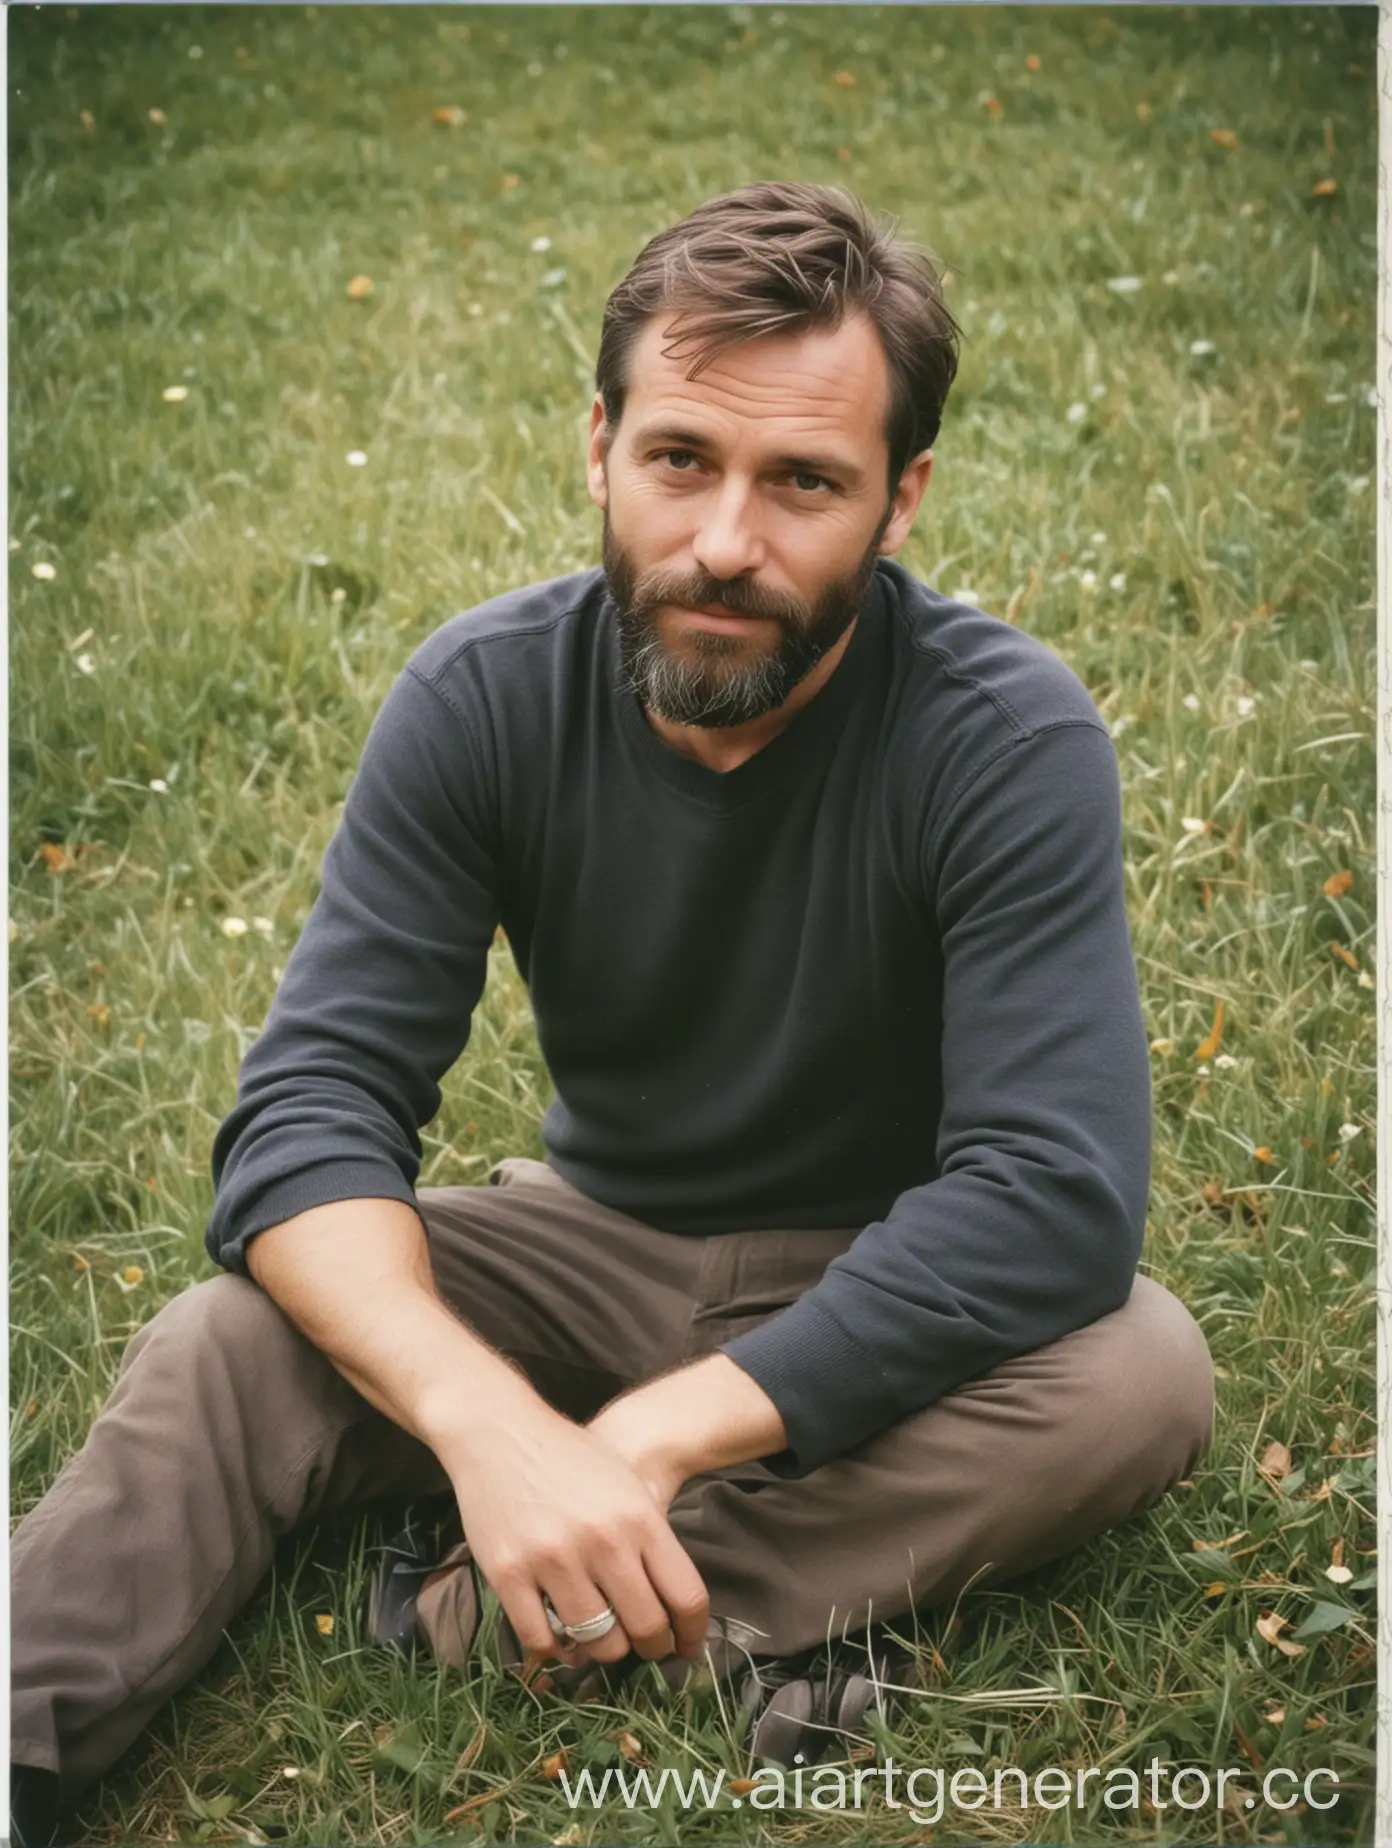 Mid-40s-Bearded-Man-Sitting-on-Grass-with-Polaroid-Photo-1998-Memory